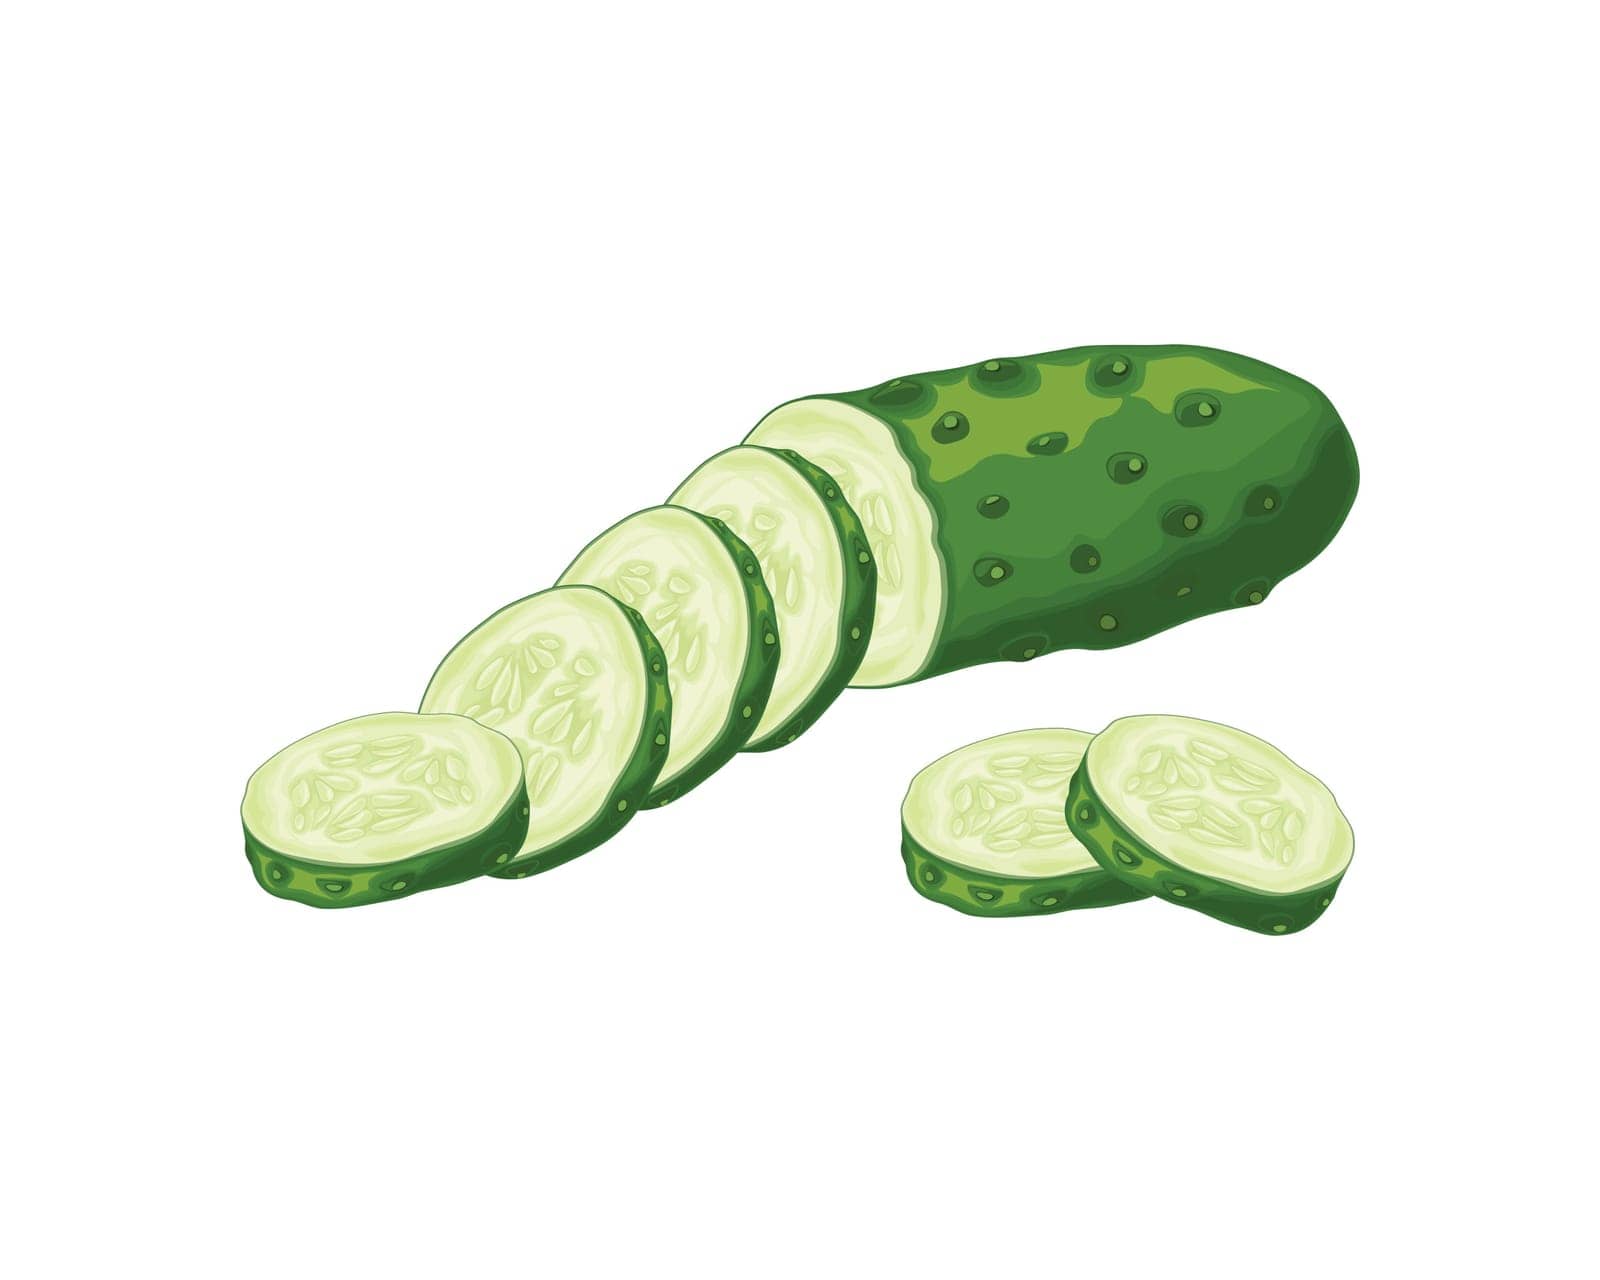 Cucumber. A ripe cucumber is green in color. Cucumber cut into pieces. Fresh vegetable garden. A vegetarian product. Vector illustration isolated on a white background by NastyaN